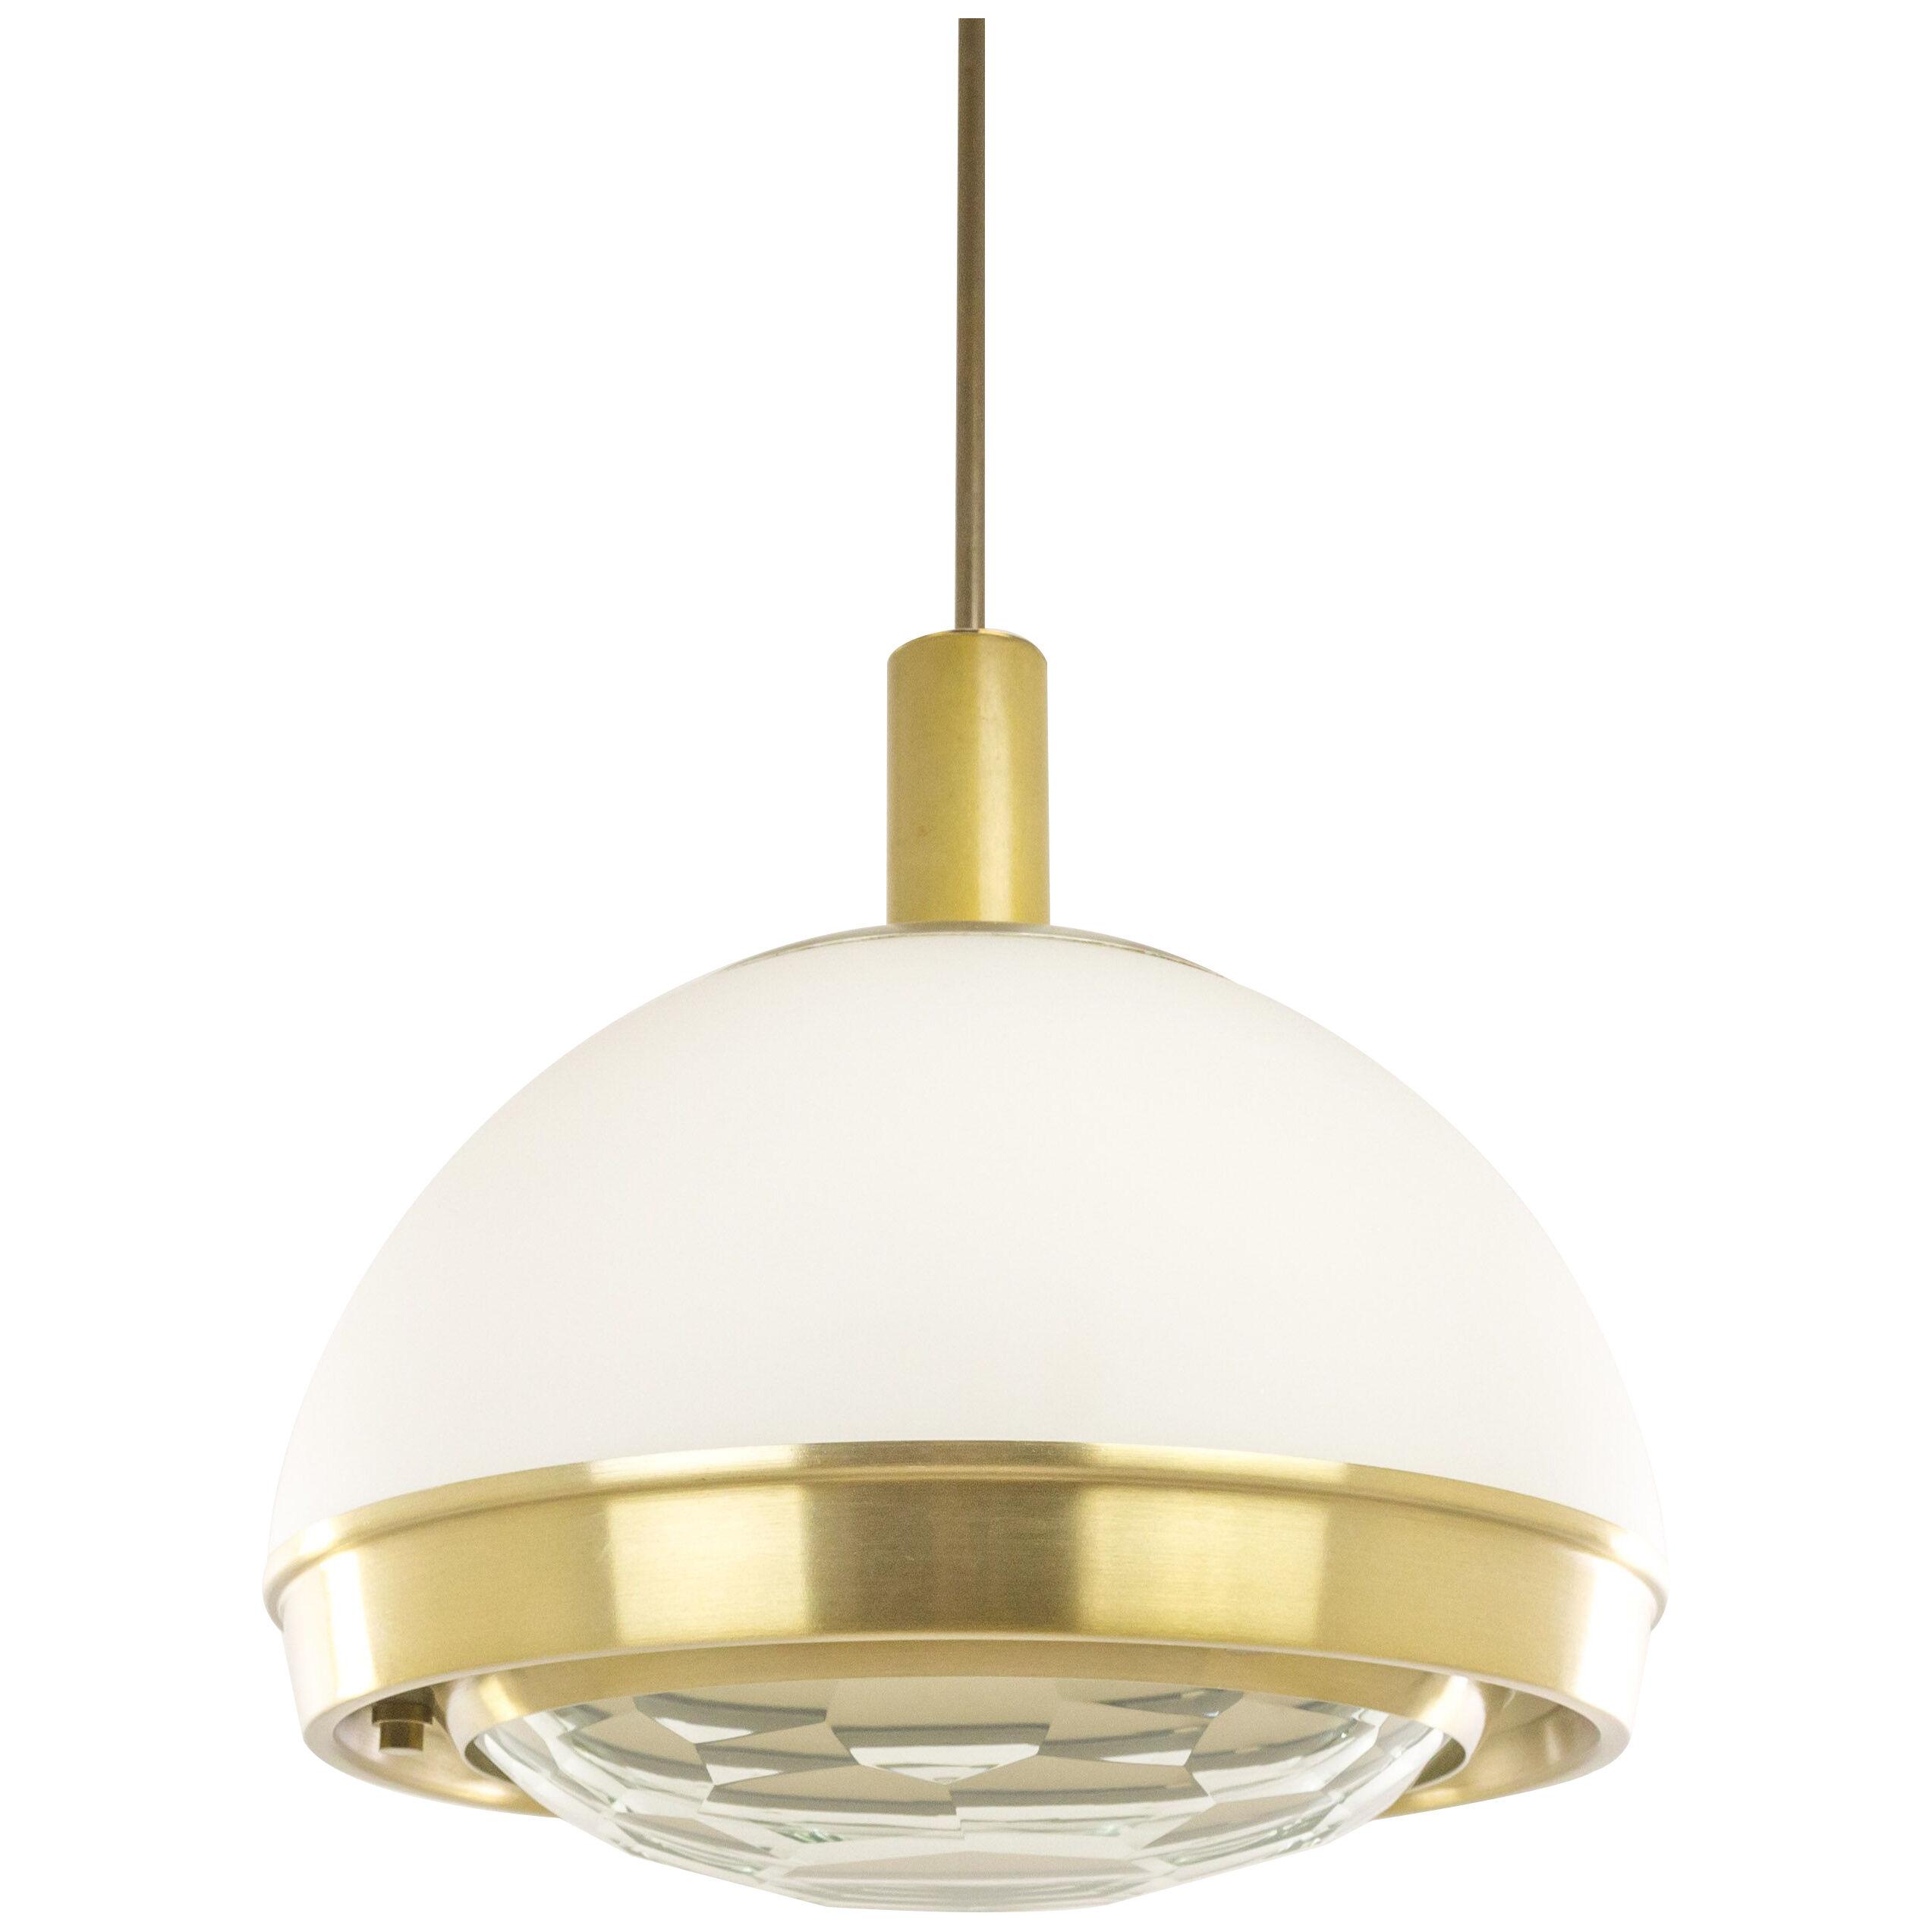 Brass pendant with faceted glass by Pia Guidetti Crippa for Lumi, 1960s